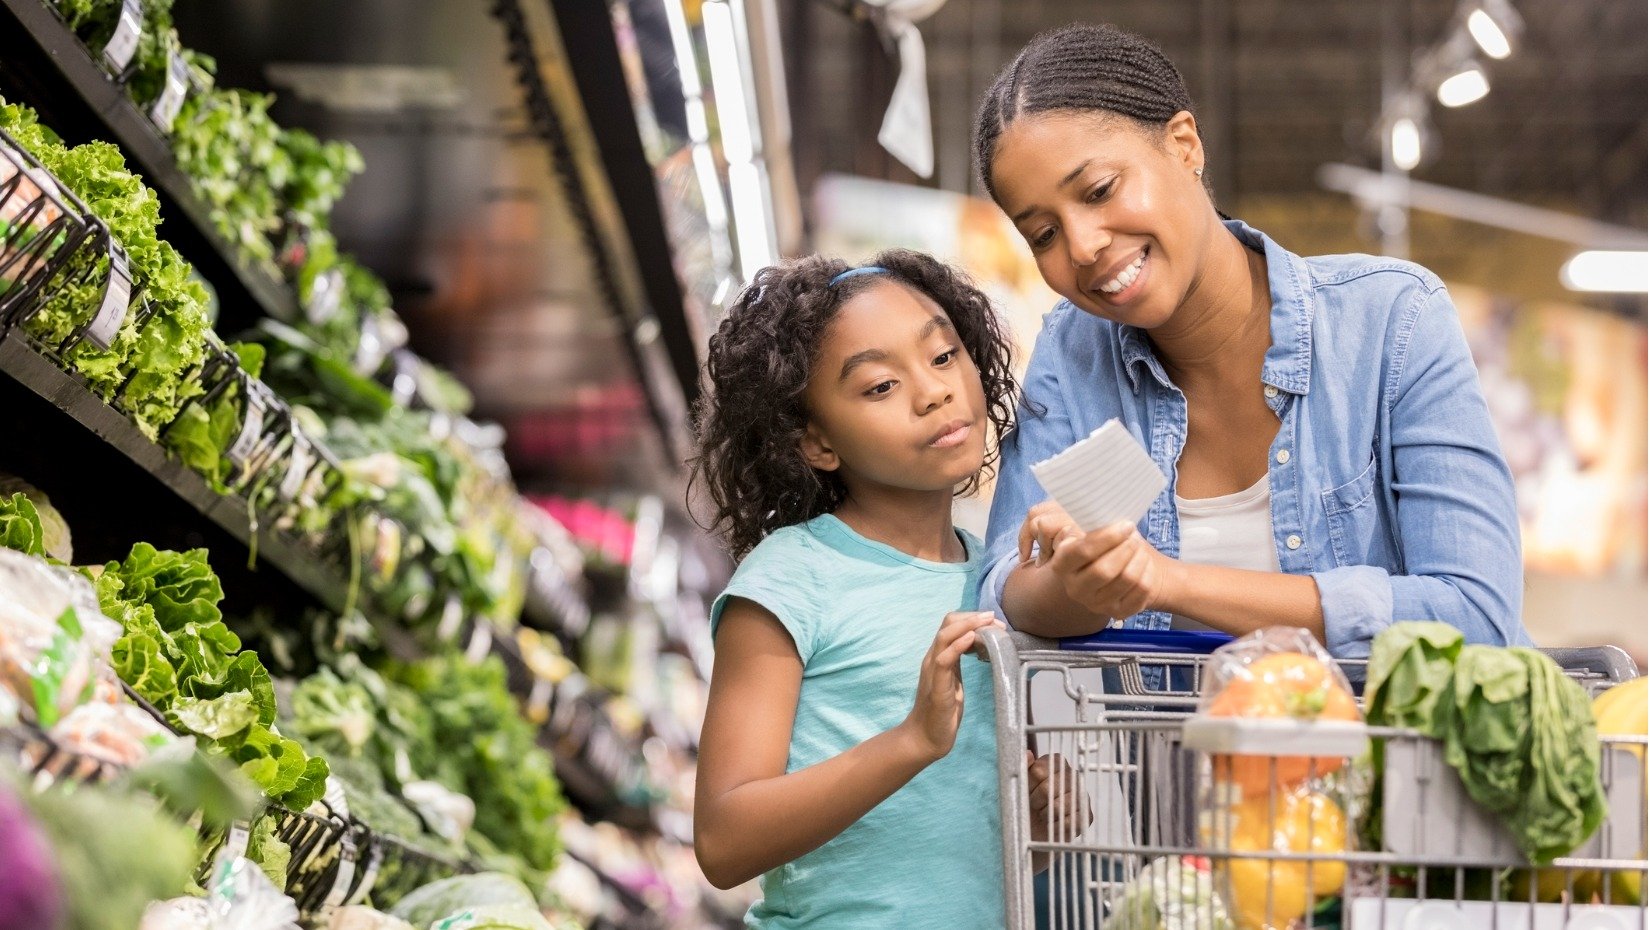 Teaching Kids About Budgeting by Having Them Assist With Grocery Shopping